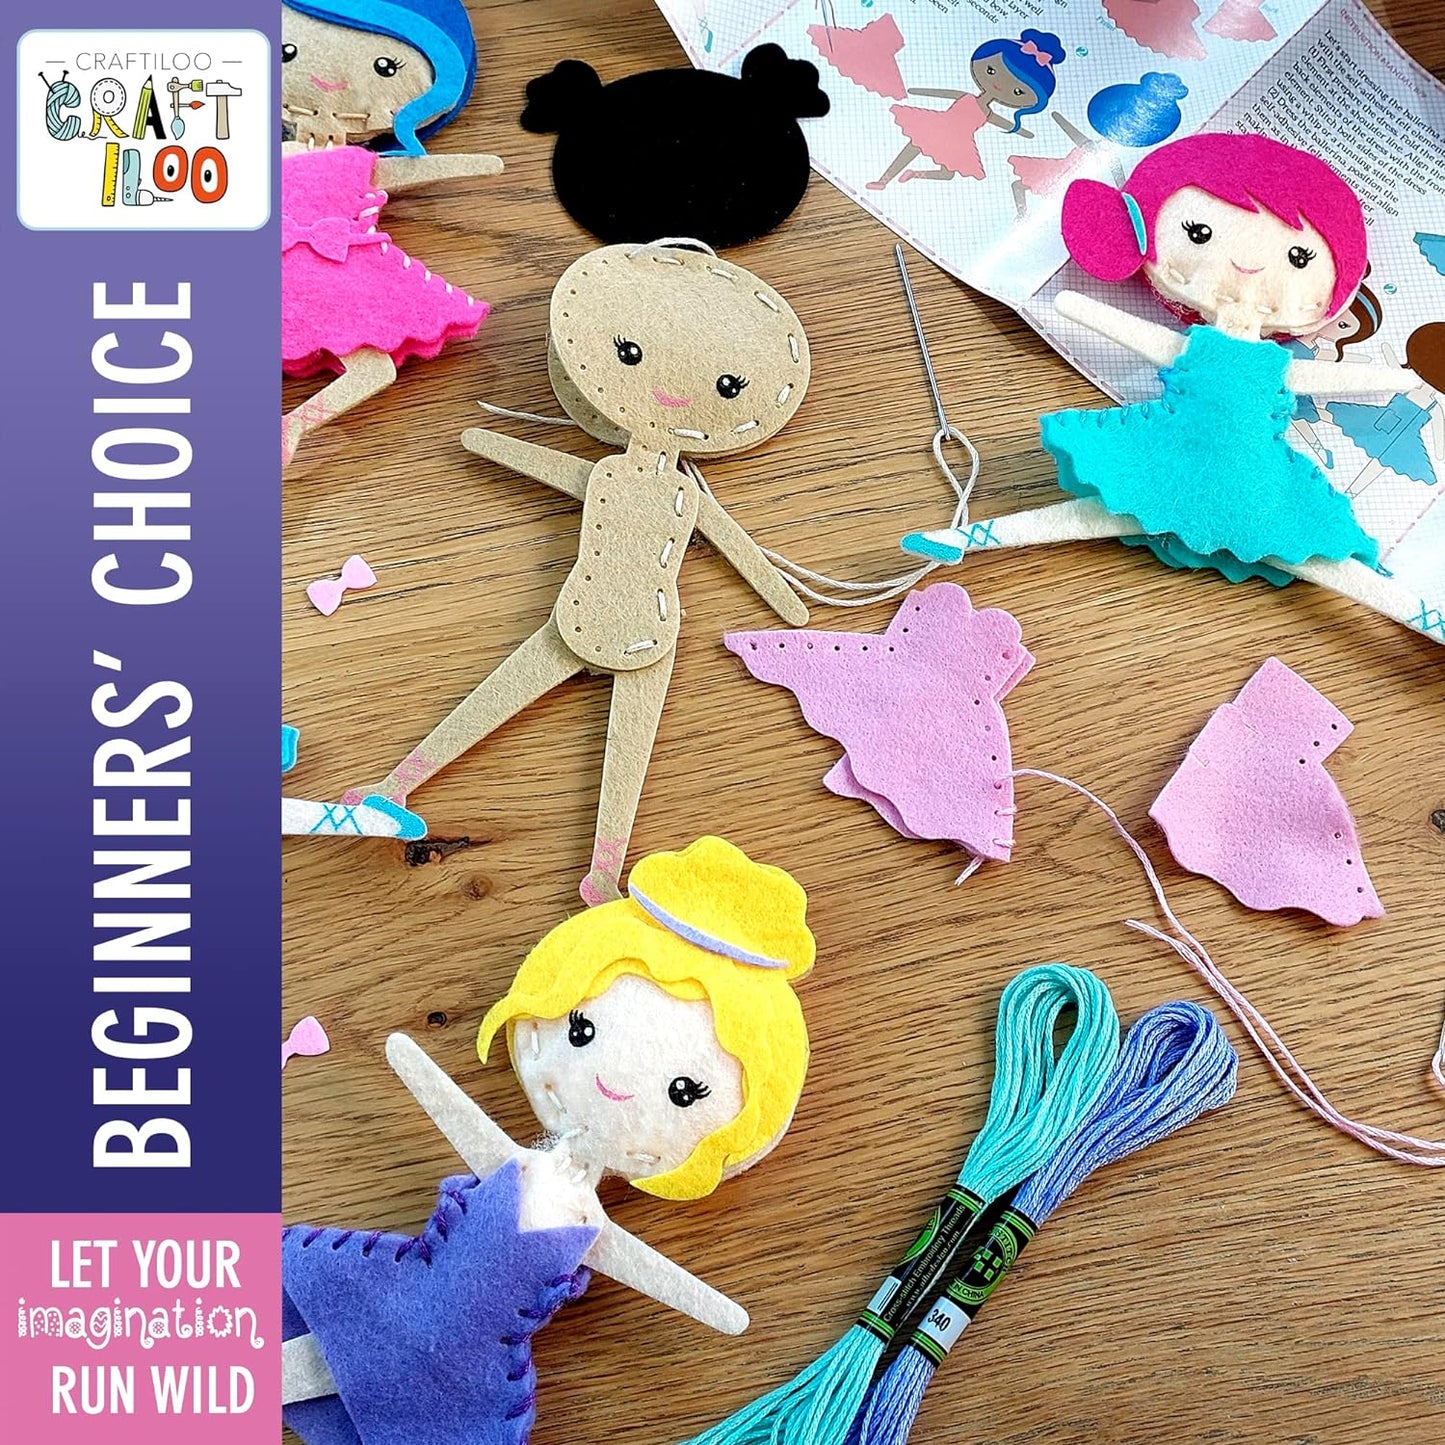 Ballerina Dancers Sewing Kit for Kids, Fun and Educational Craft Set for Boys and Girls Age 5-12, Sew Your Own Felt Ballerina Craft Kit for Beginners (Ballerina Kit)